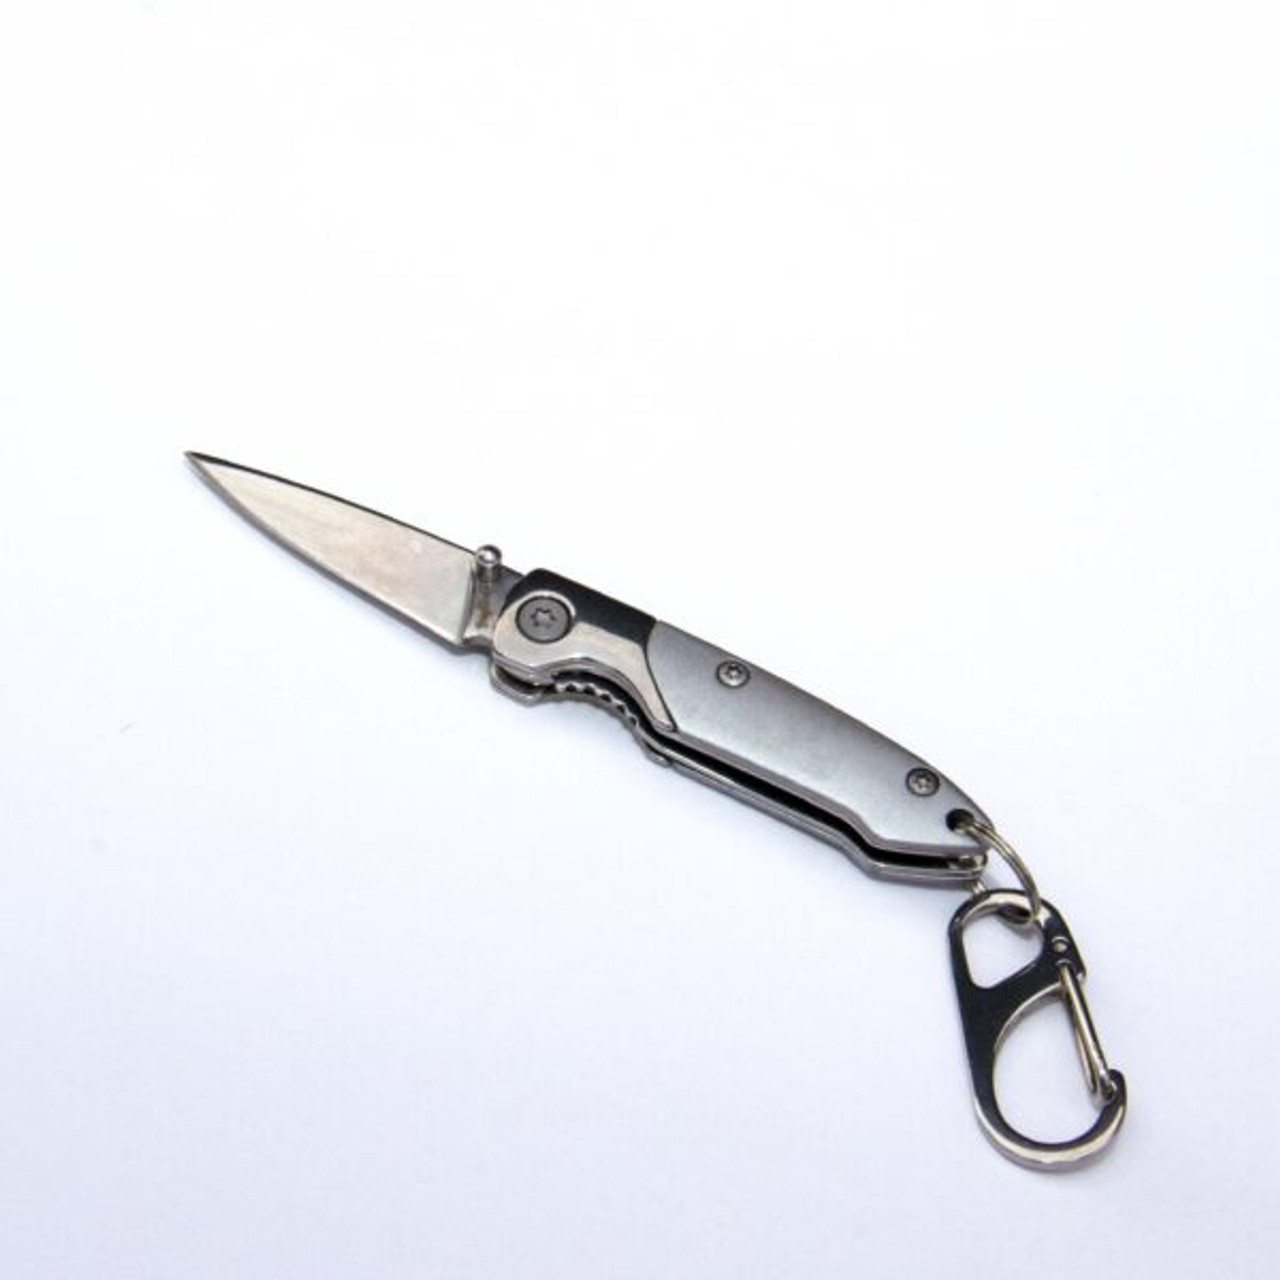 Brighten Blades Silver and Cold Keychain Folding Knife (BB134) 1.65 in Satin 8Cr13MoV Spear Point Blade, Silver Handle